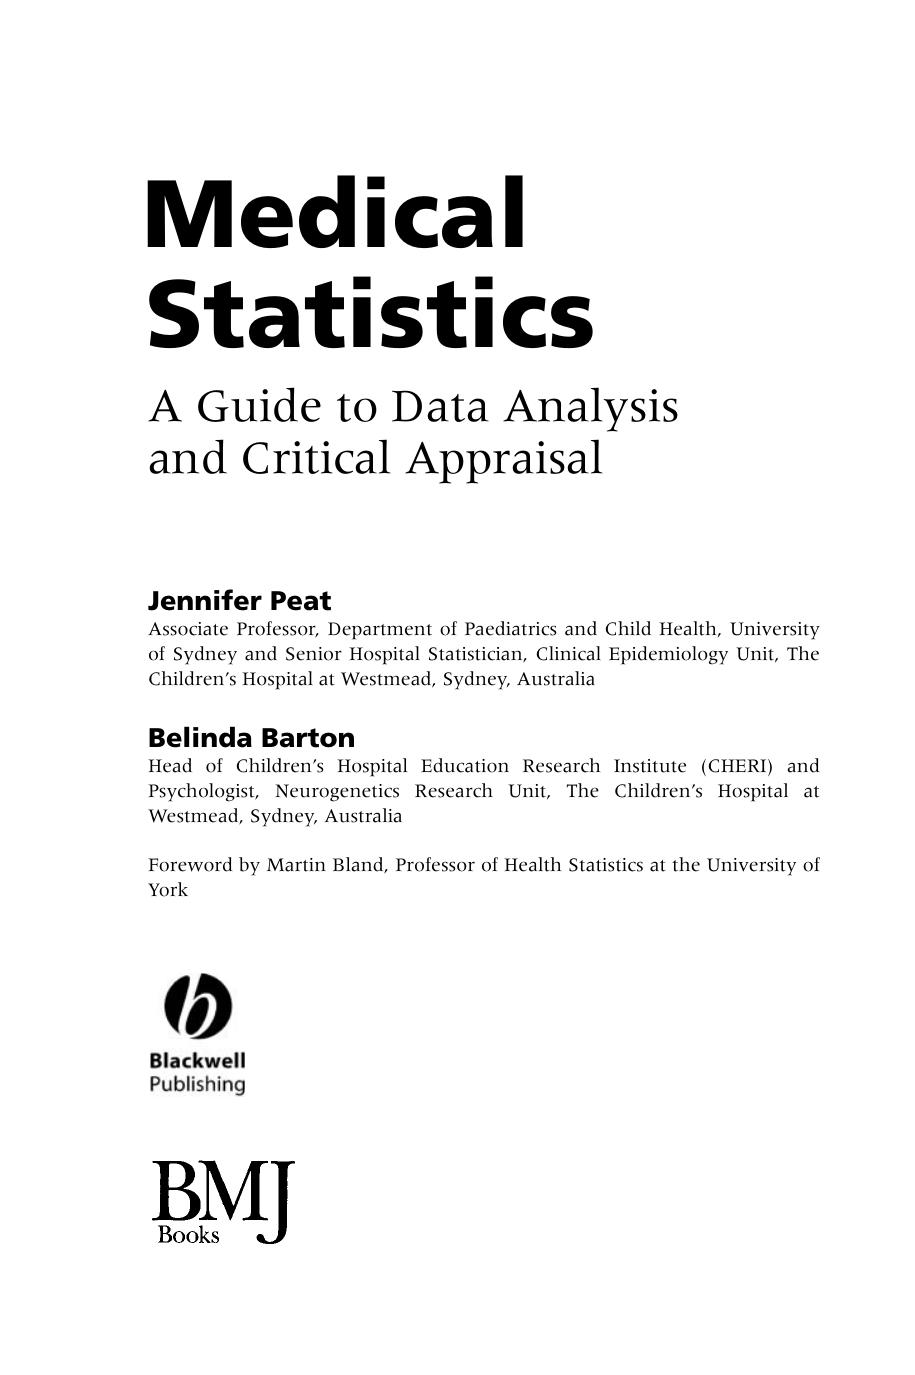 Medical Statistics A Guide to Data Analysis and Critical Appraisal